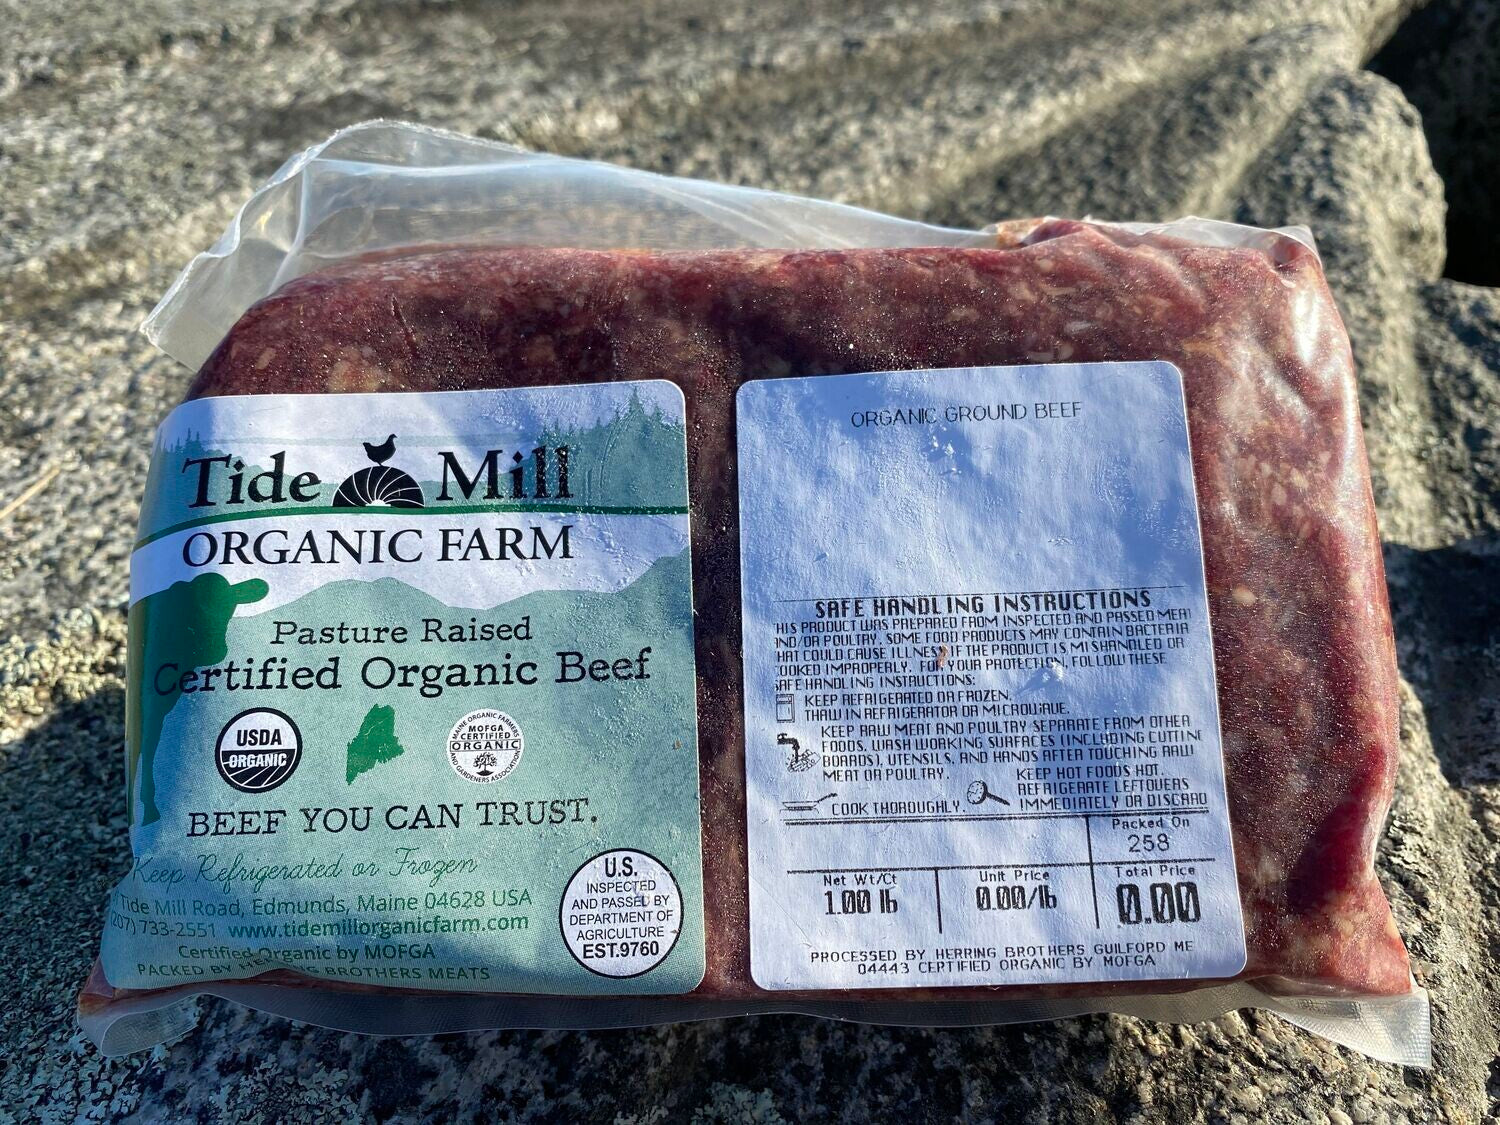 A package of organic ground beef